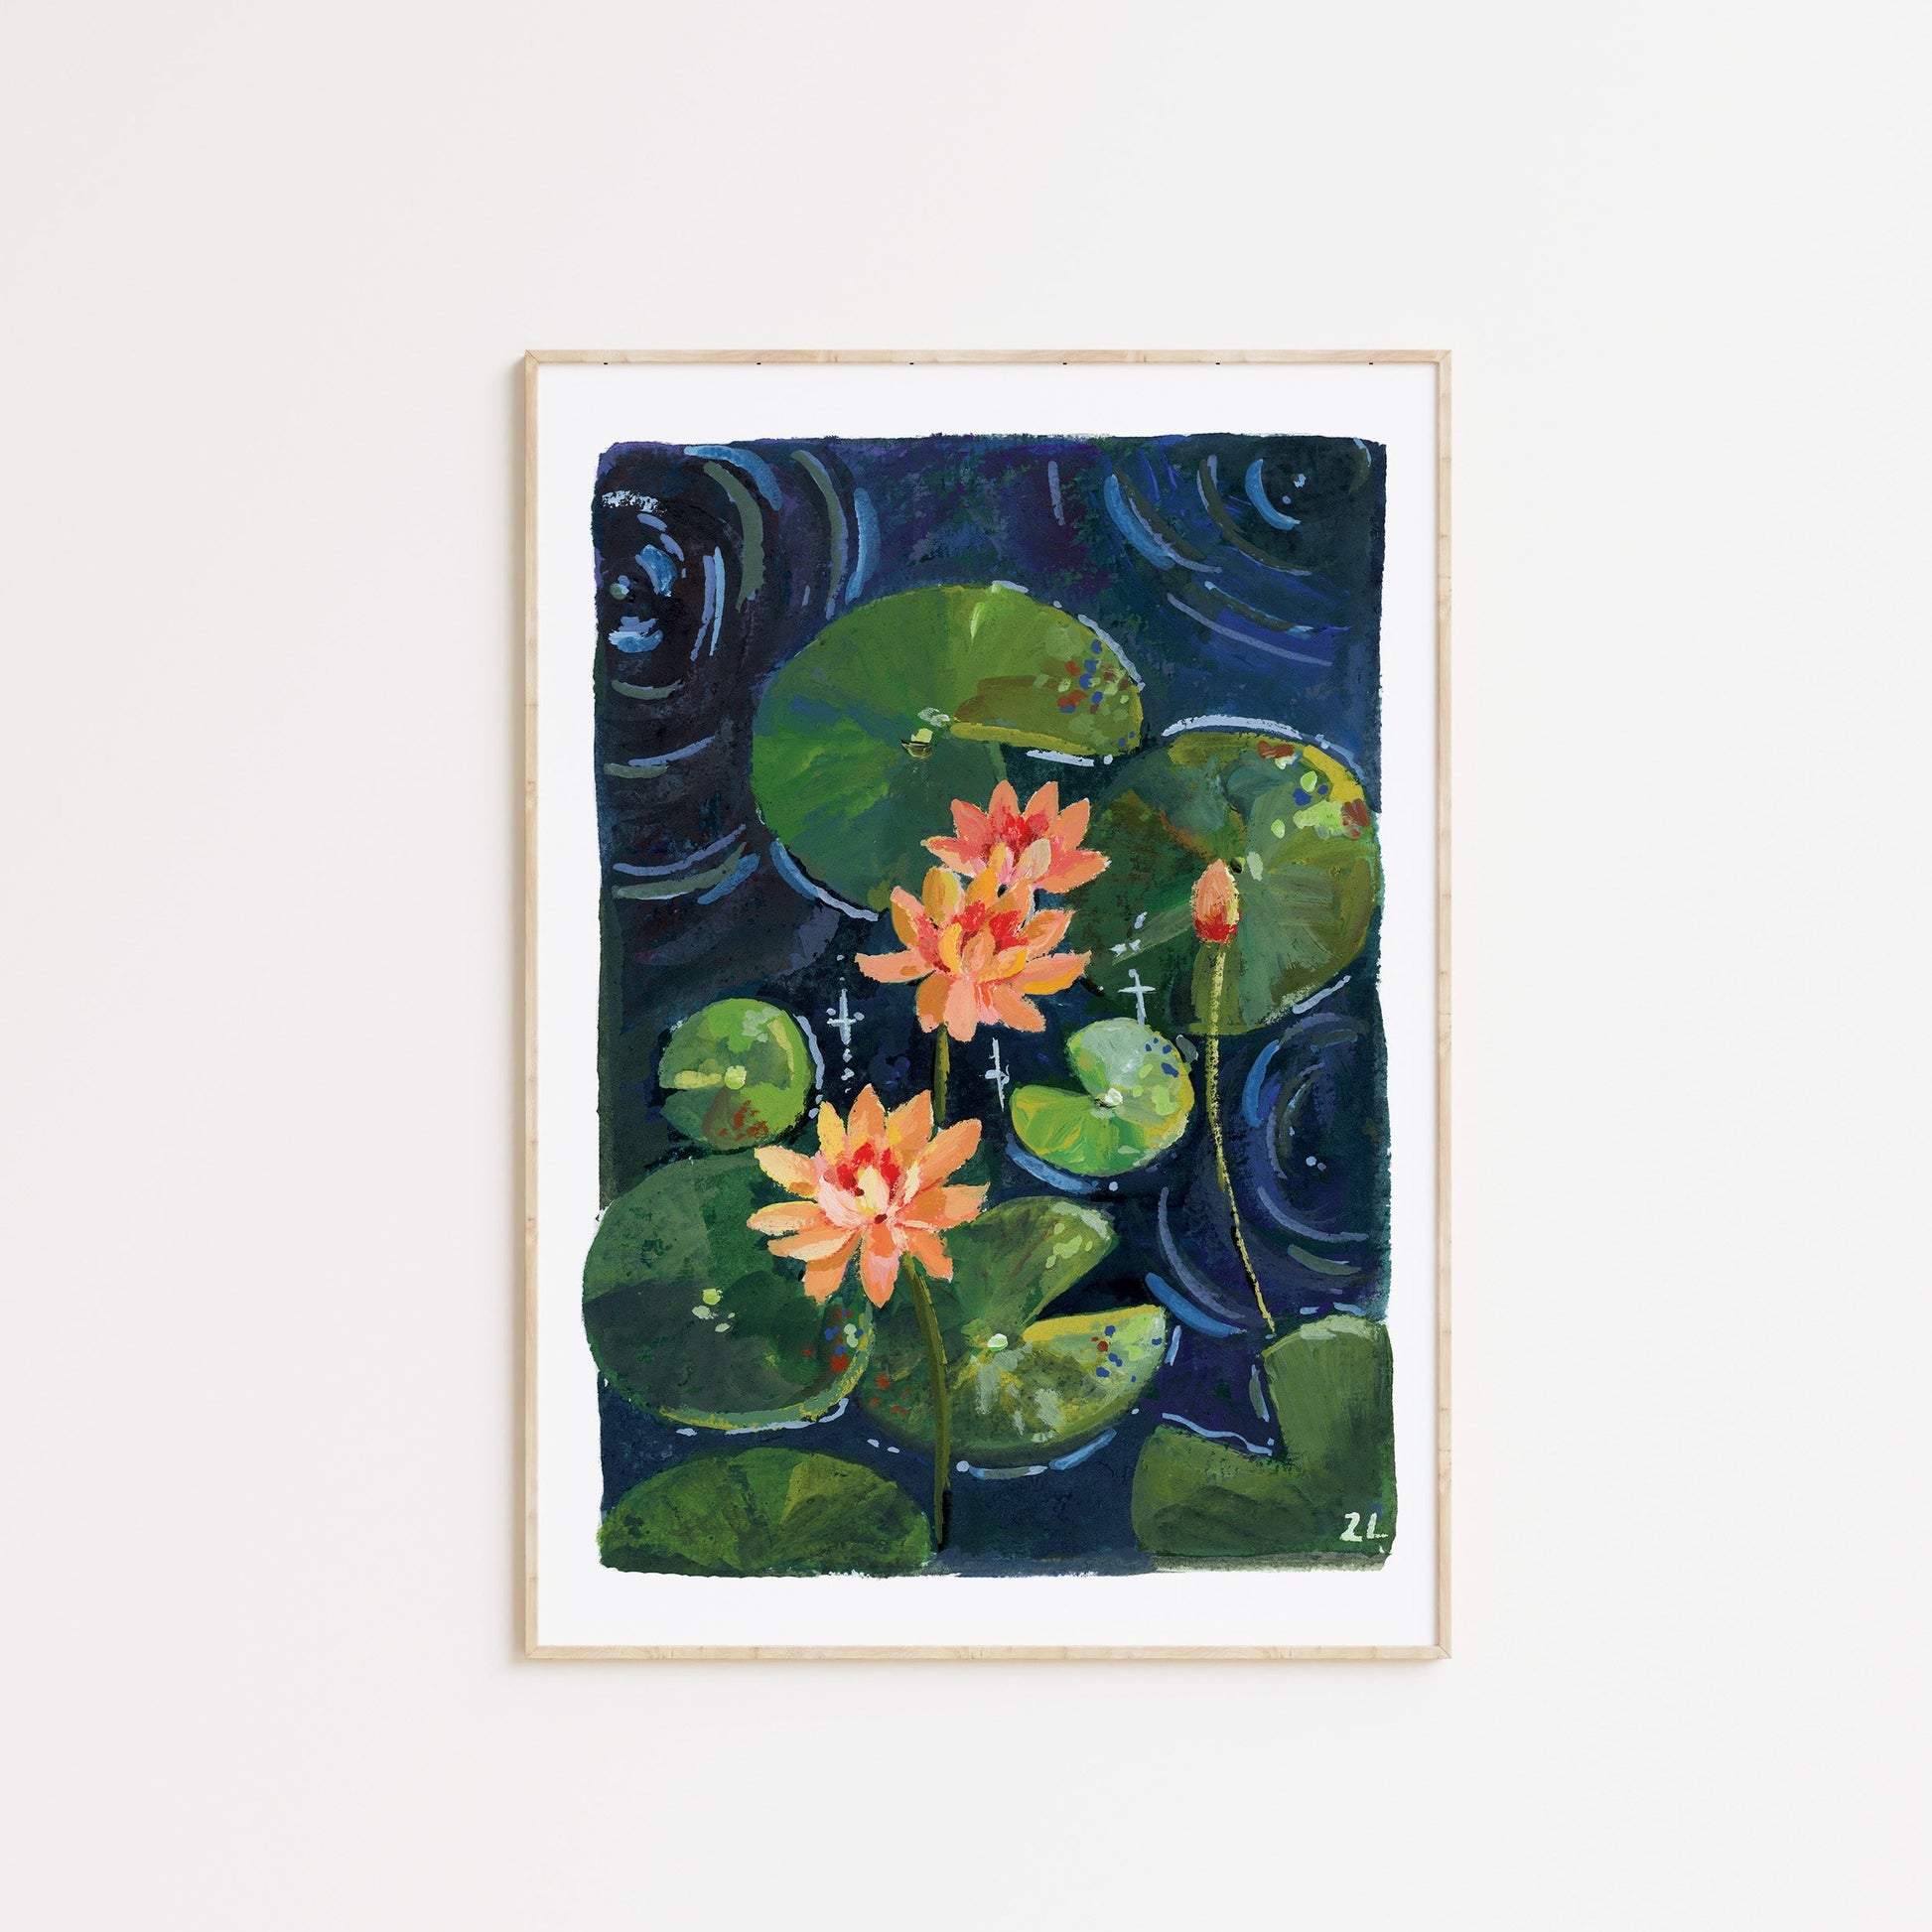 Green Waterlily Pond Artist Gouache On Canvas Board 5x7 inches